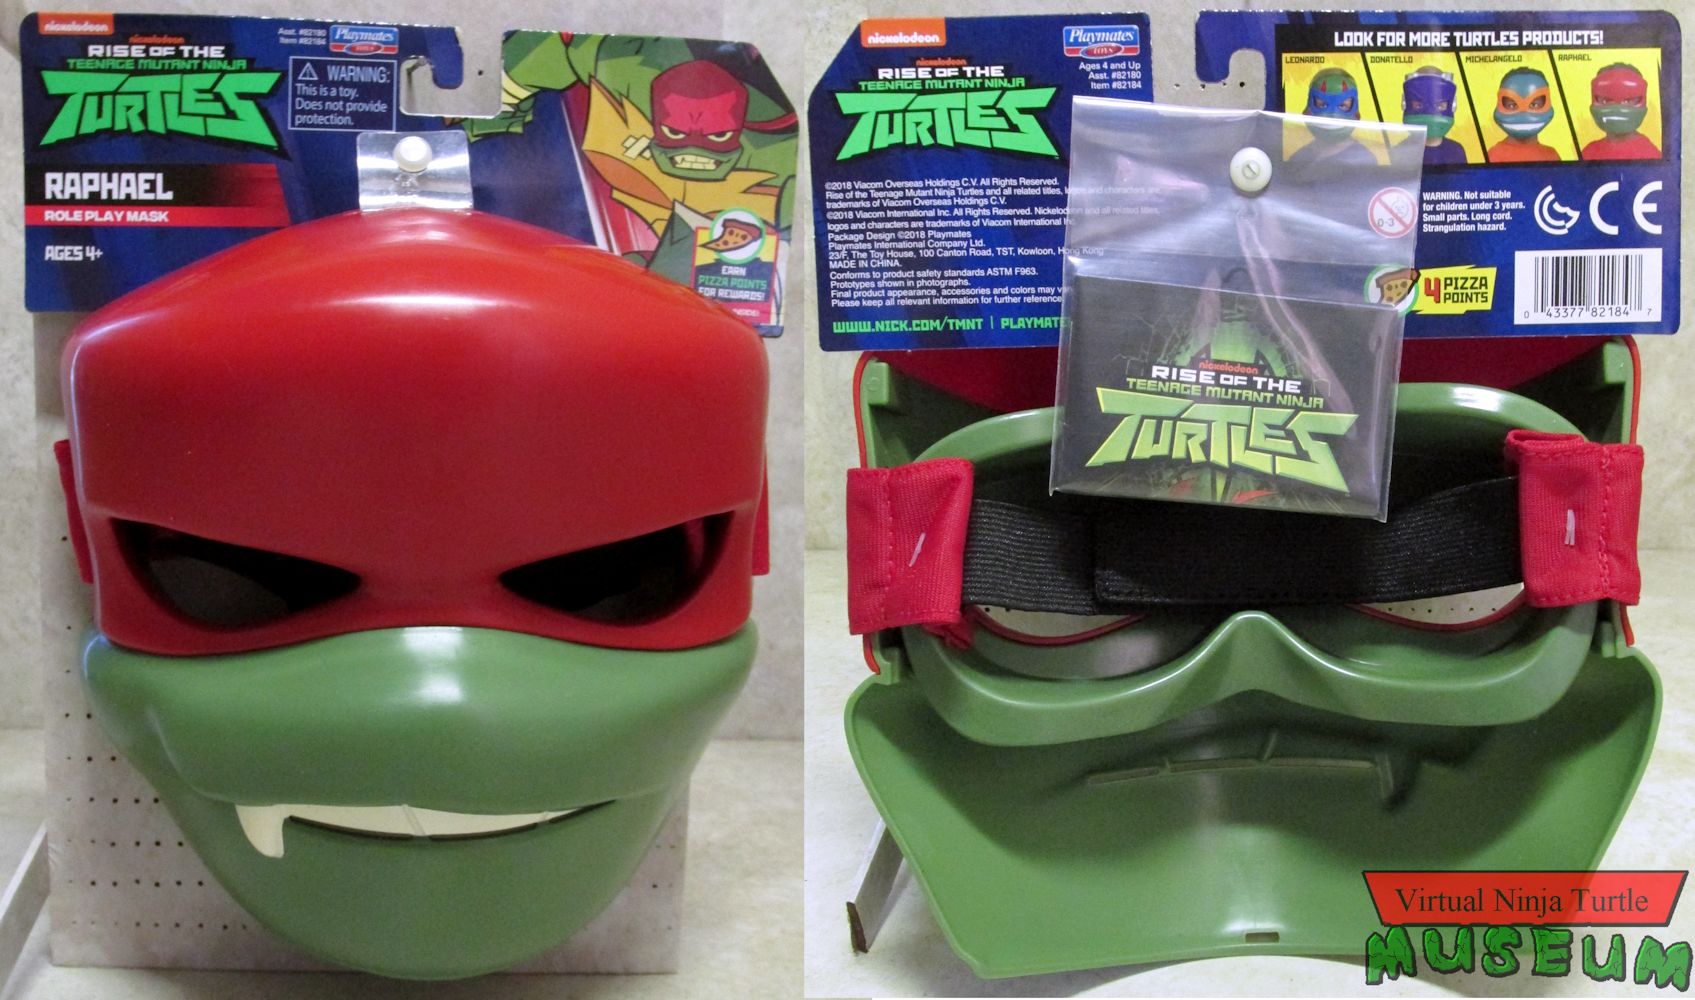 Raphael Role Play Mask front and back